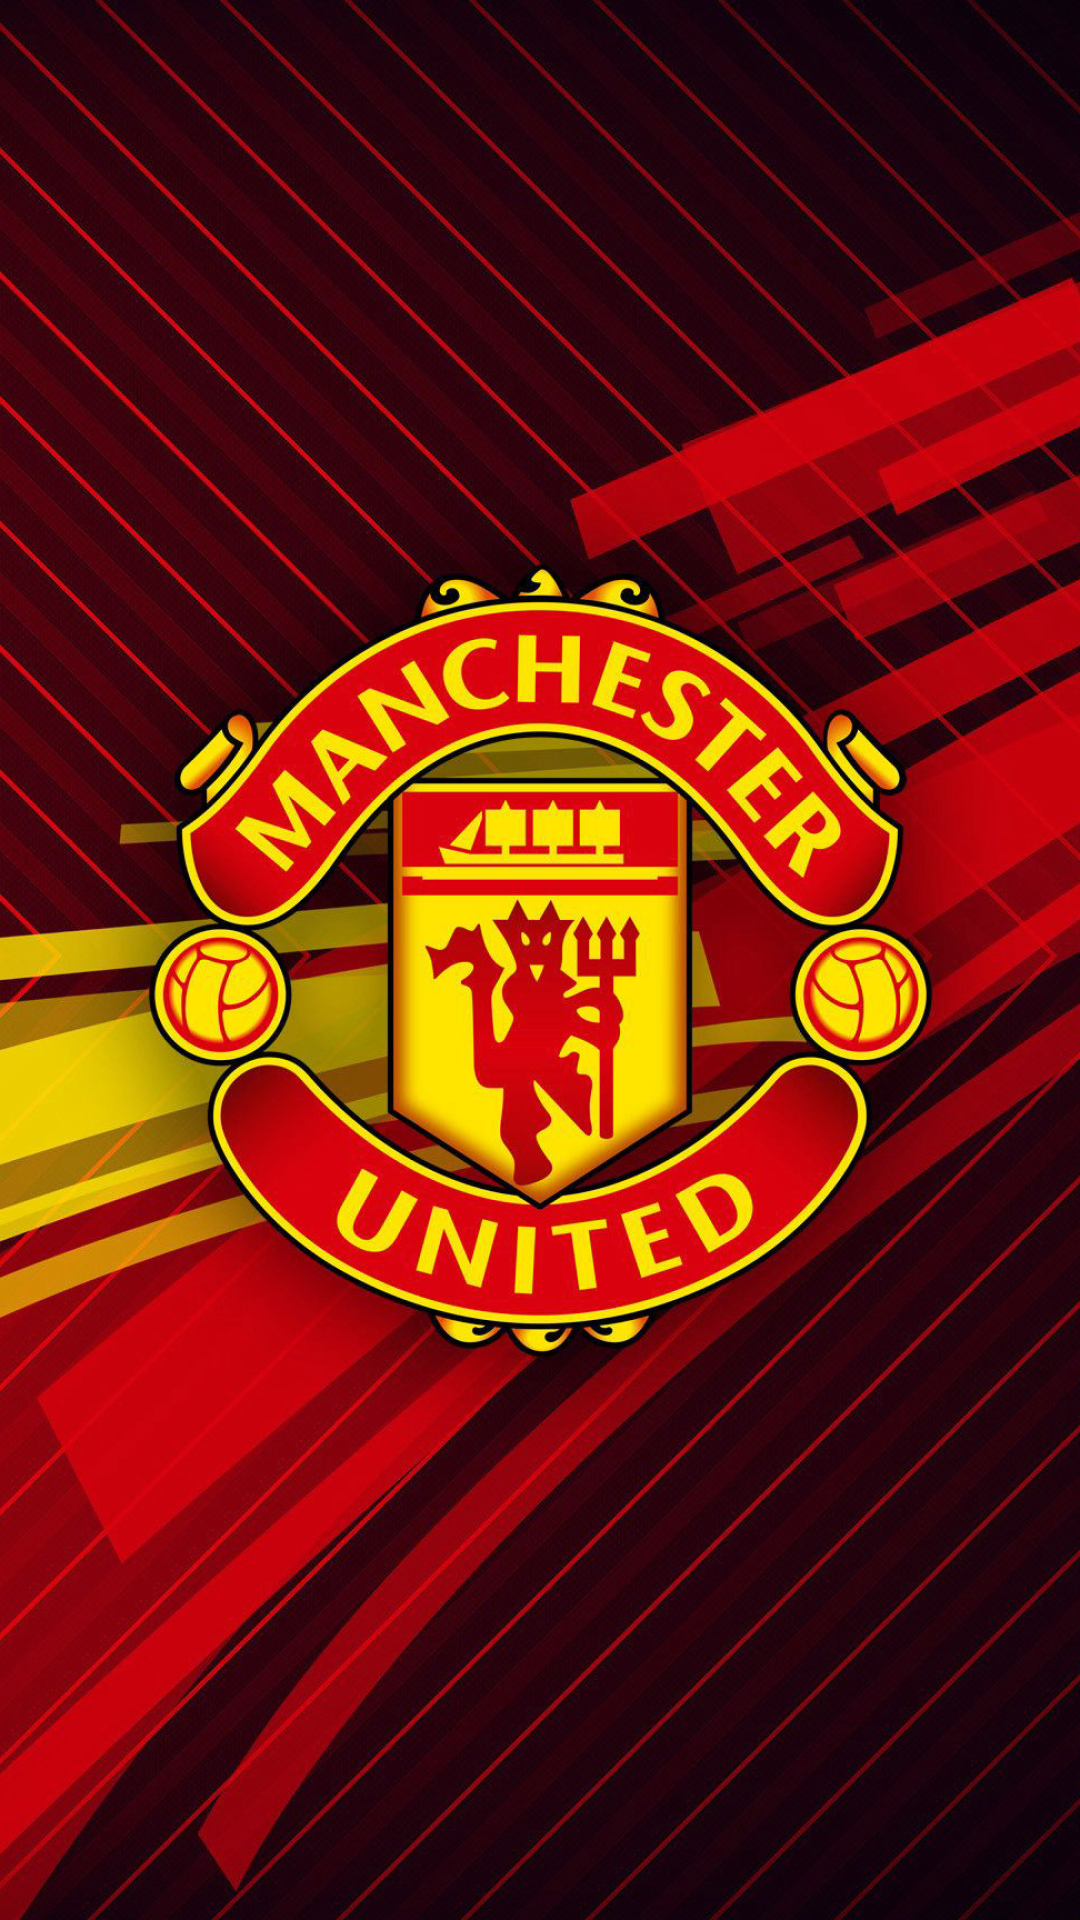 Manchester United, Striking wallpapers, Iconic emblem, Dynamic visuals, 1080x1920 Full HD Phone